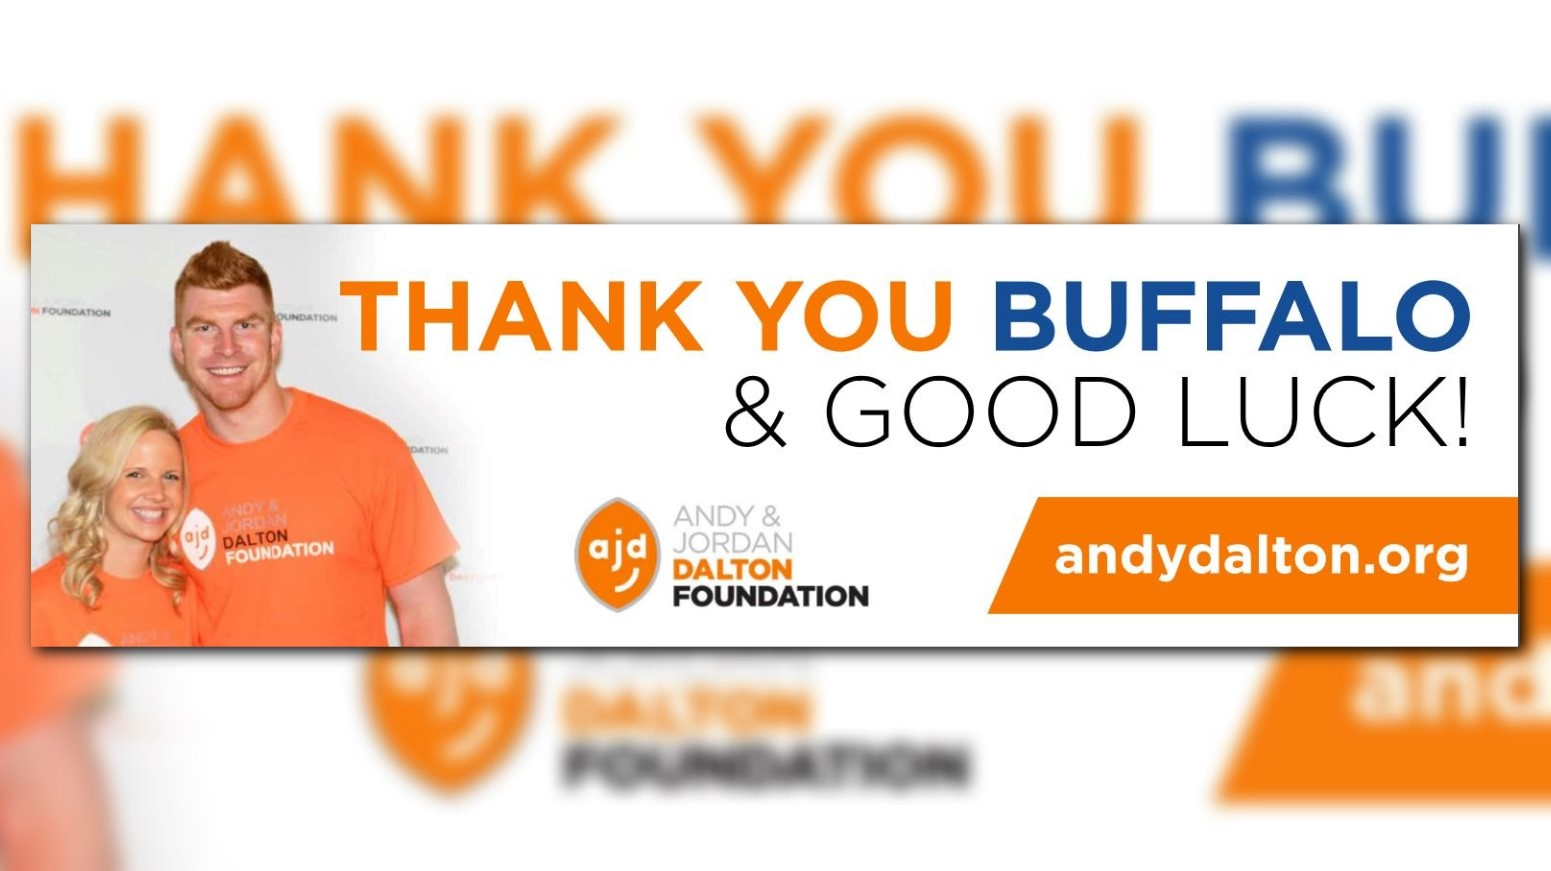 Spotlight on the Positive: Aaron Rodgers, the Packers Organization & Bills fans donating over $300,000 to Andy Dalton's Foundation